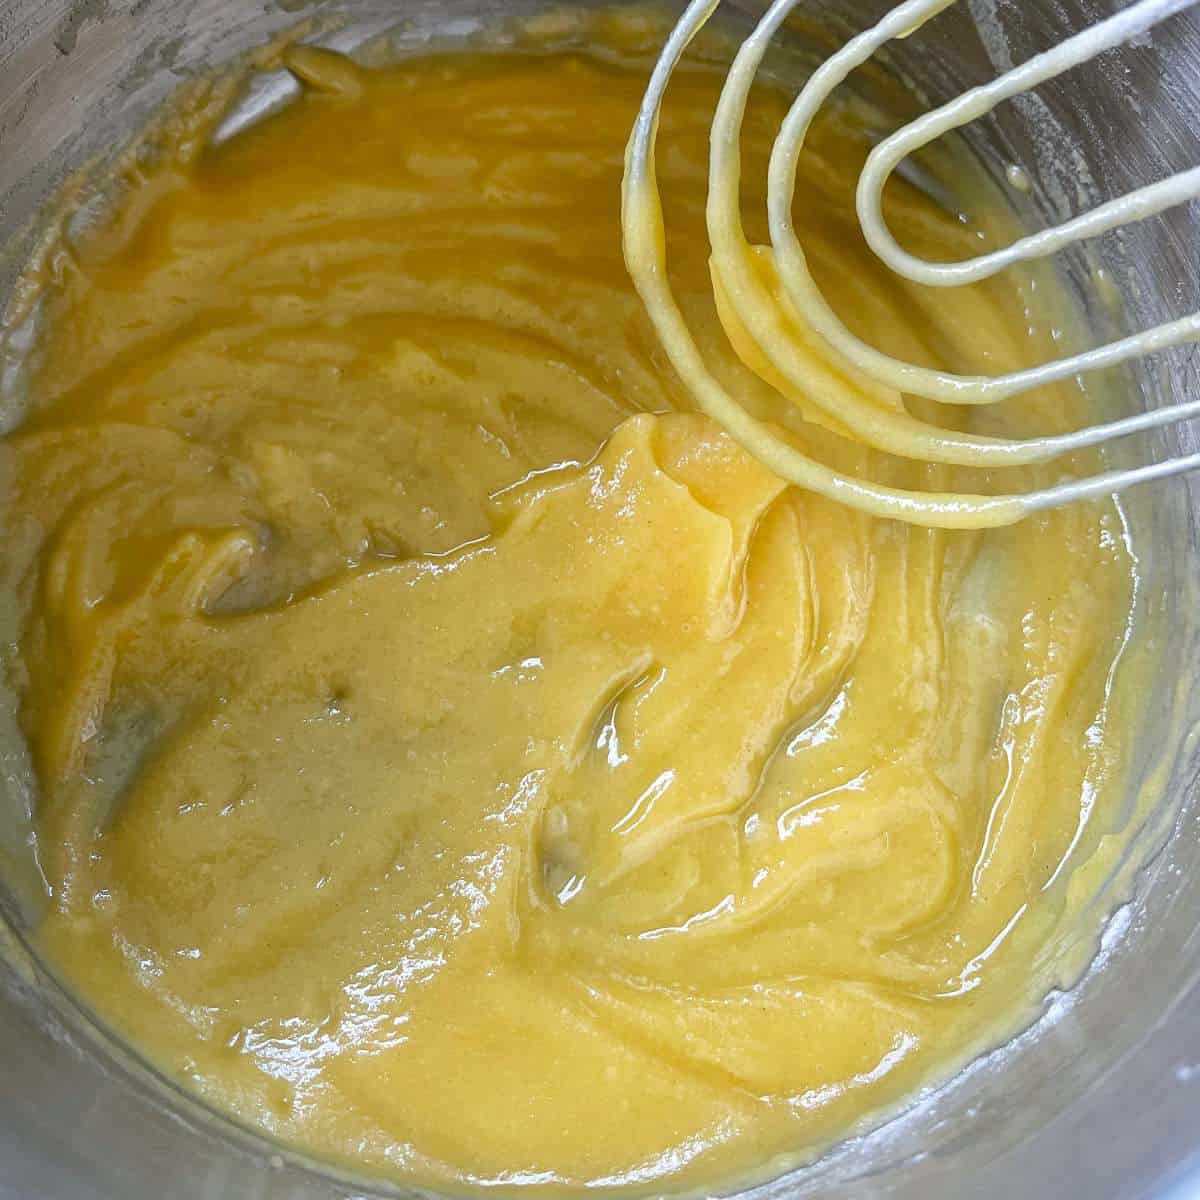 Melted butter and flour being combined over a low heat in a small pot.